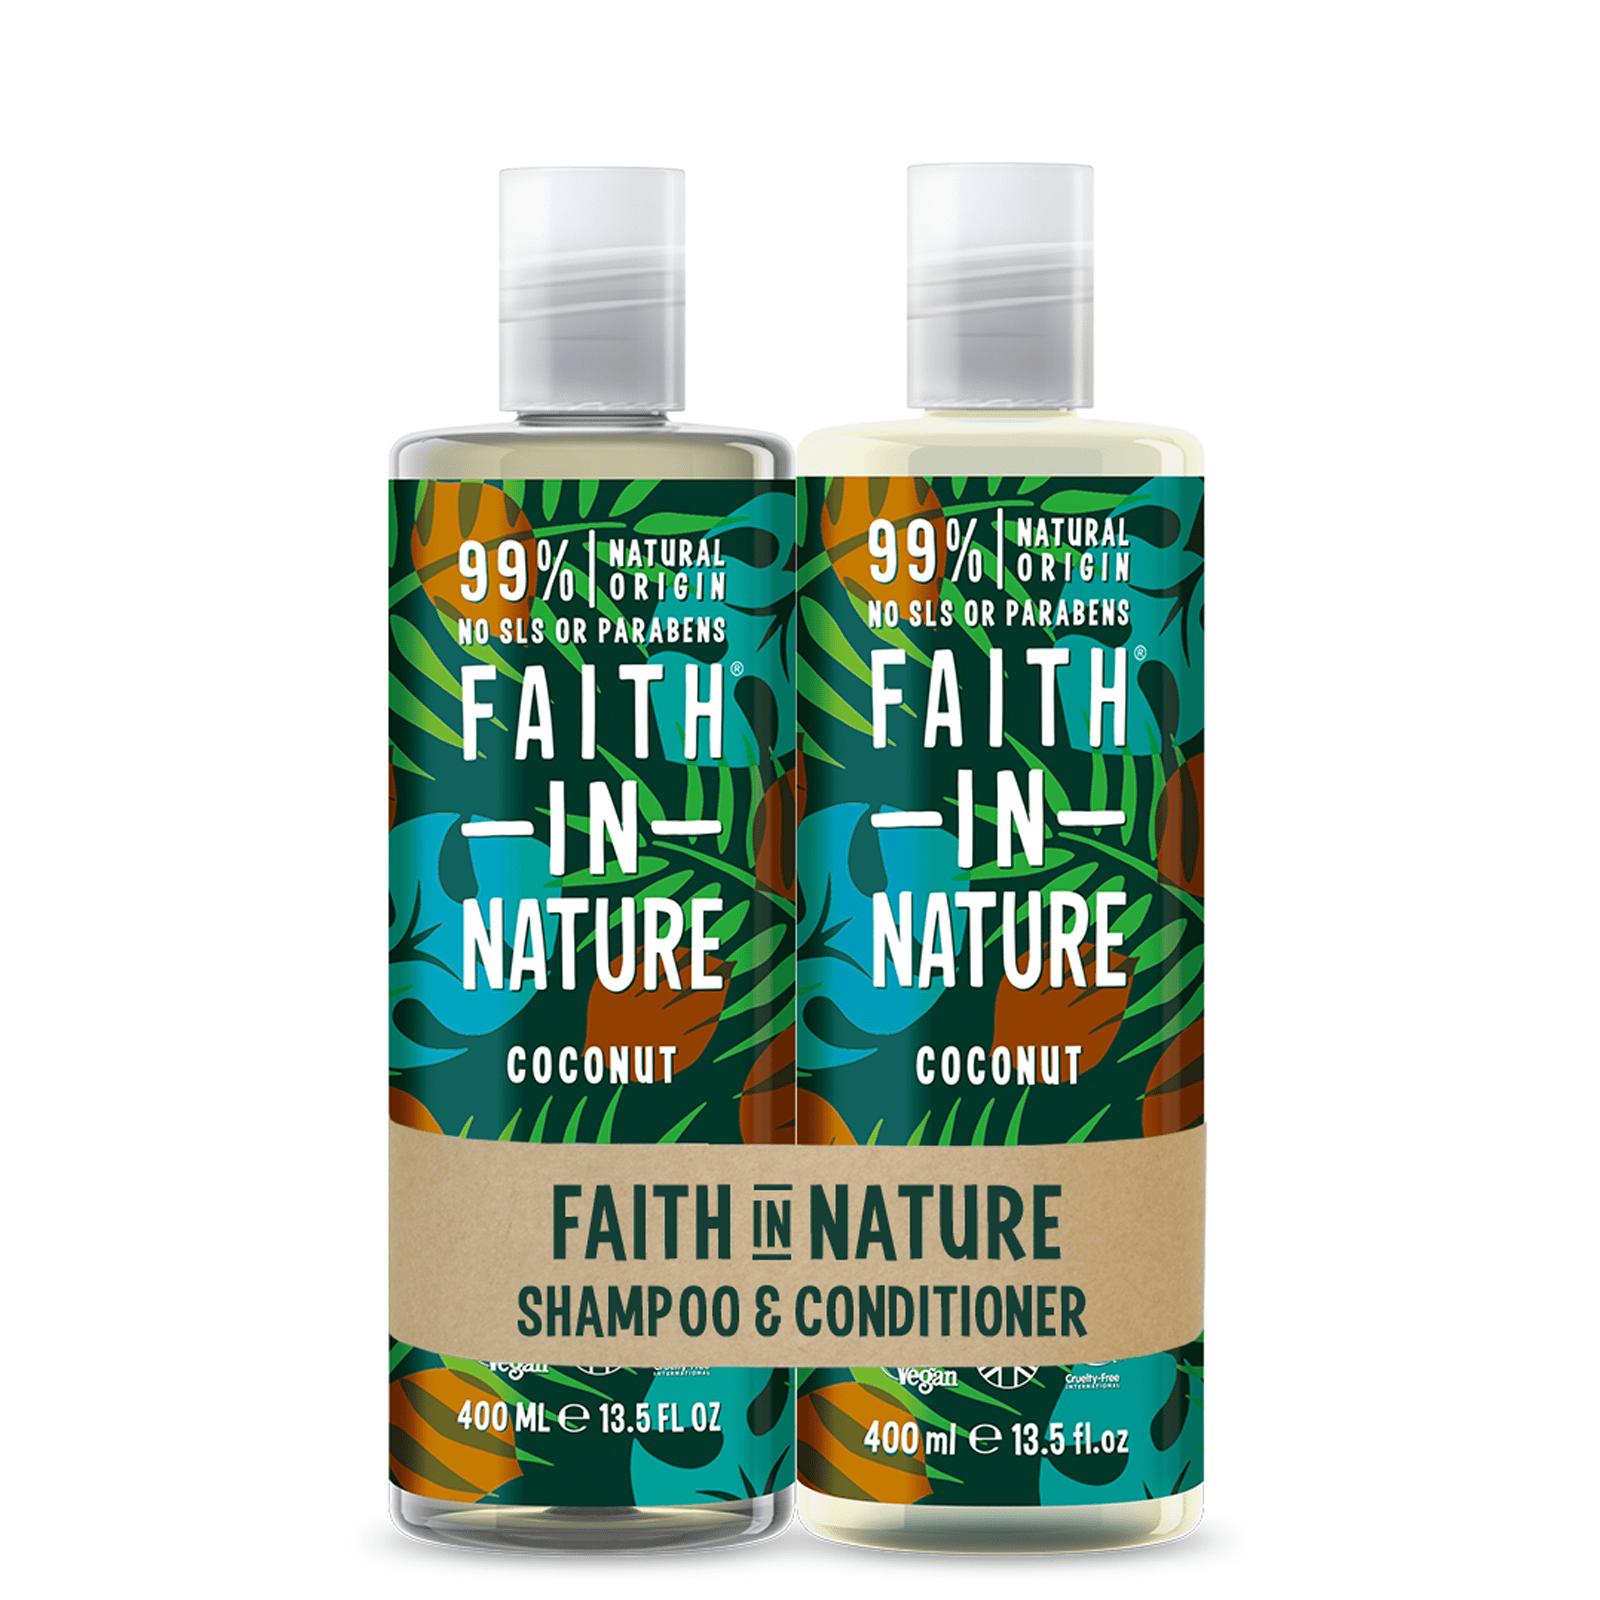 Faith in Nature Coconut Shampoo & Conditioner Banded Pack  2 x 400ml